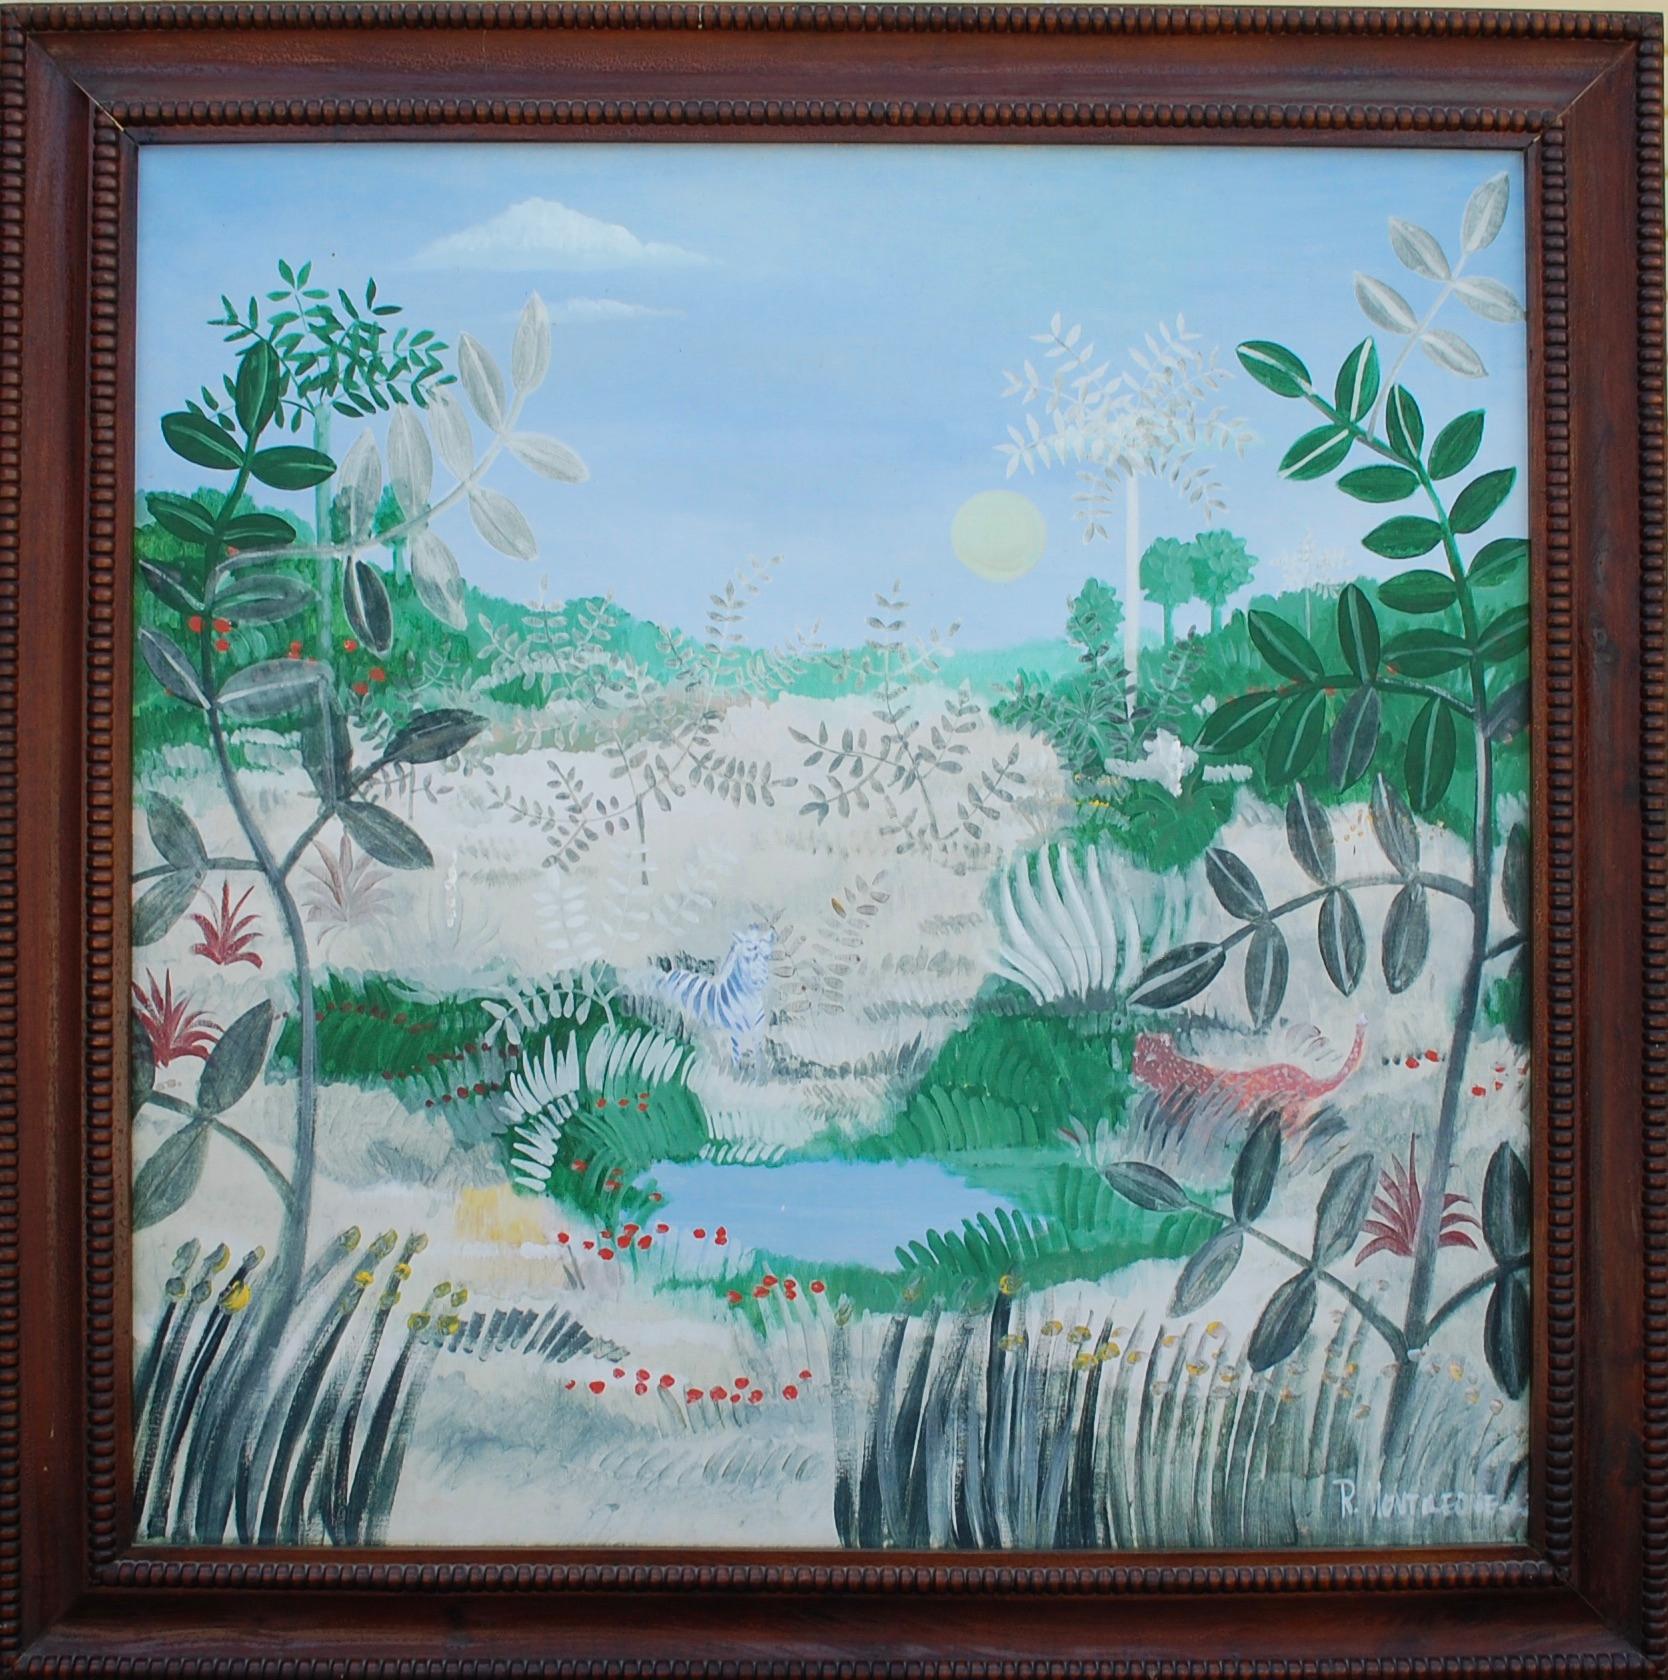 R. Montileone Landscape Painting - Jungle With Tiger Large Oil Painting